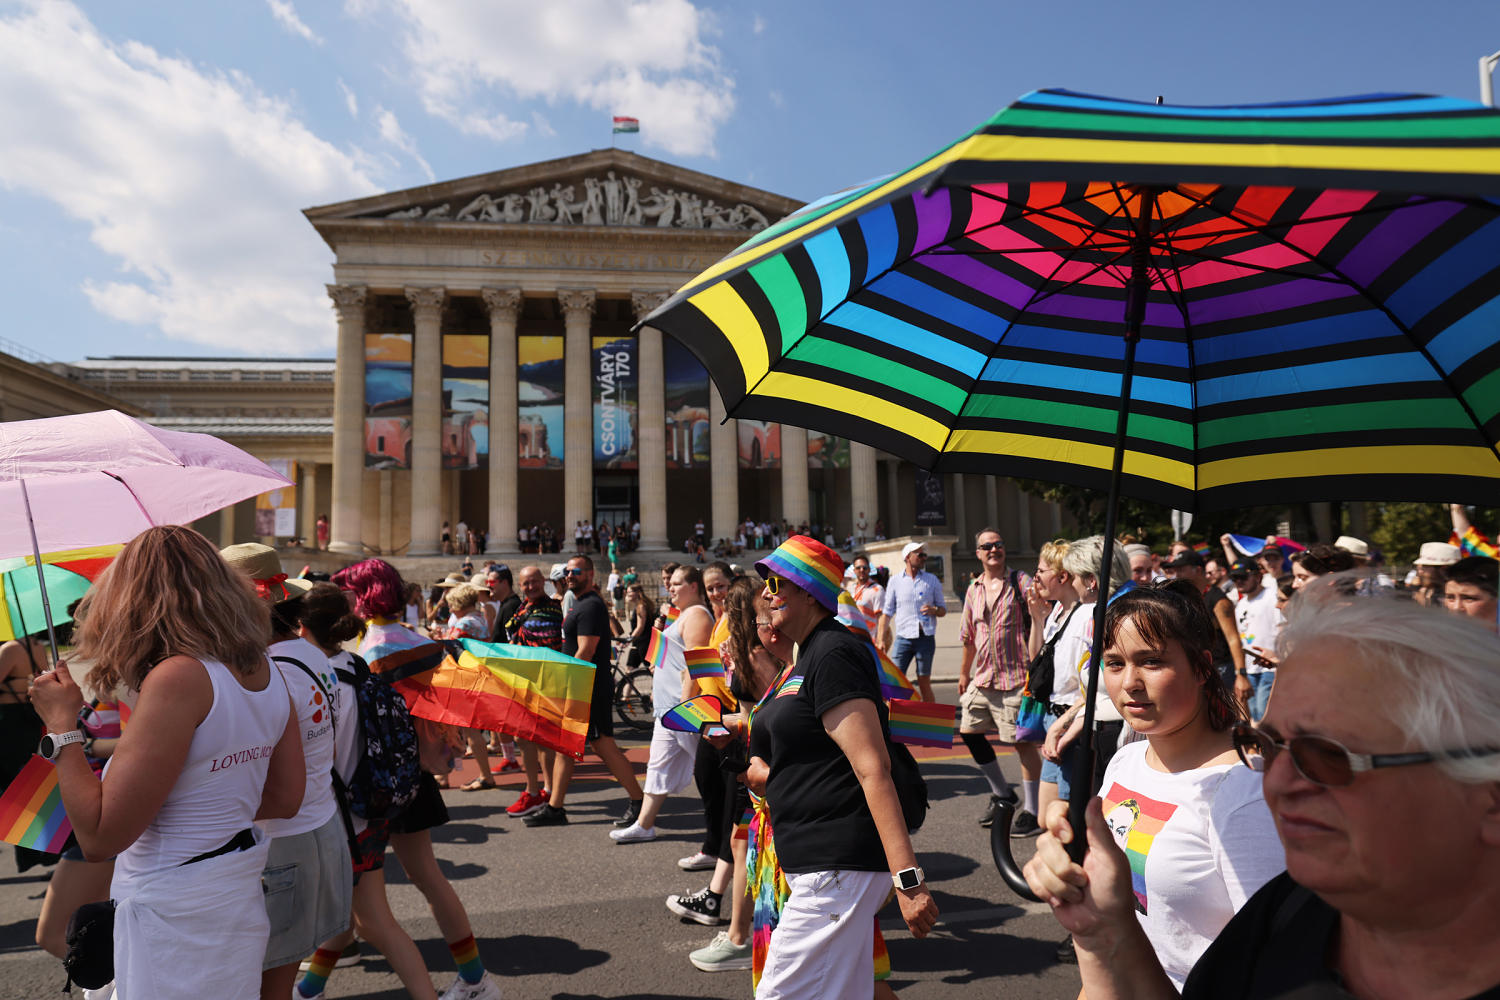 State Department warns of terrorist attacks at Pride events abroad